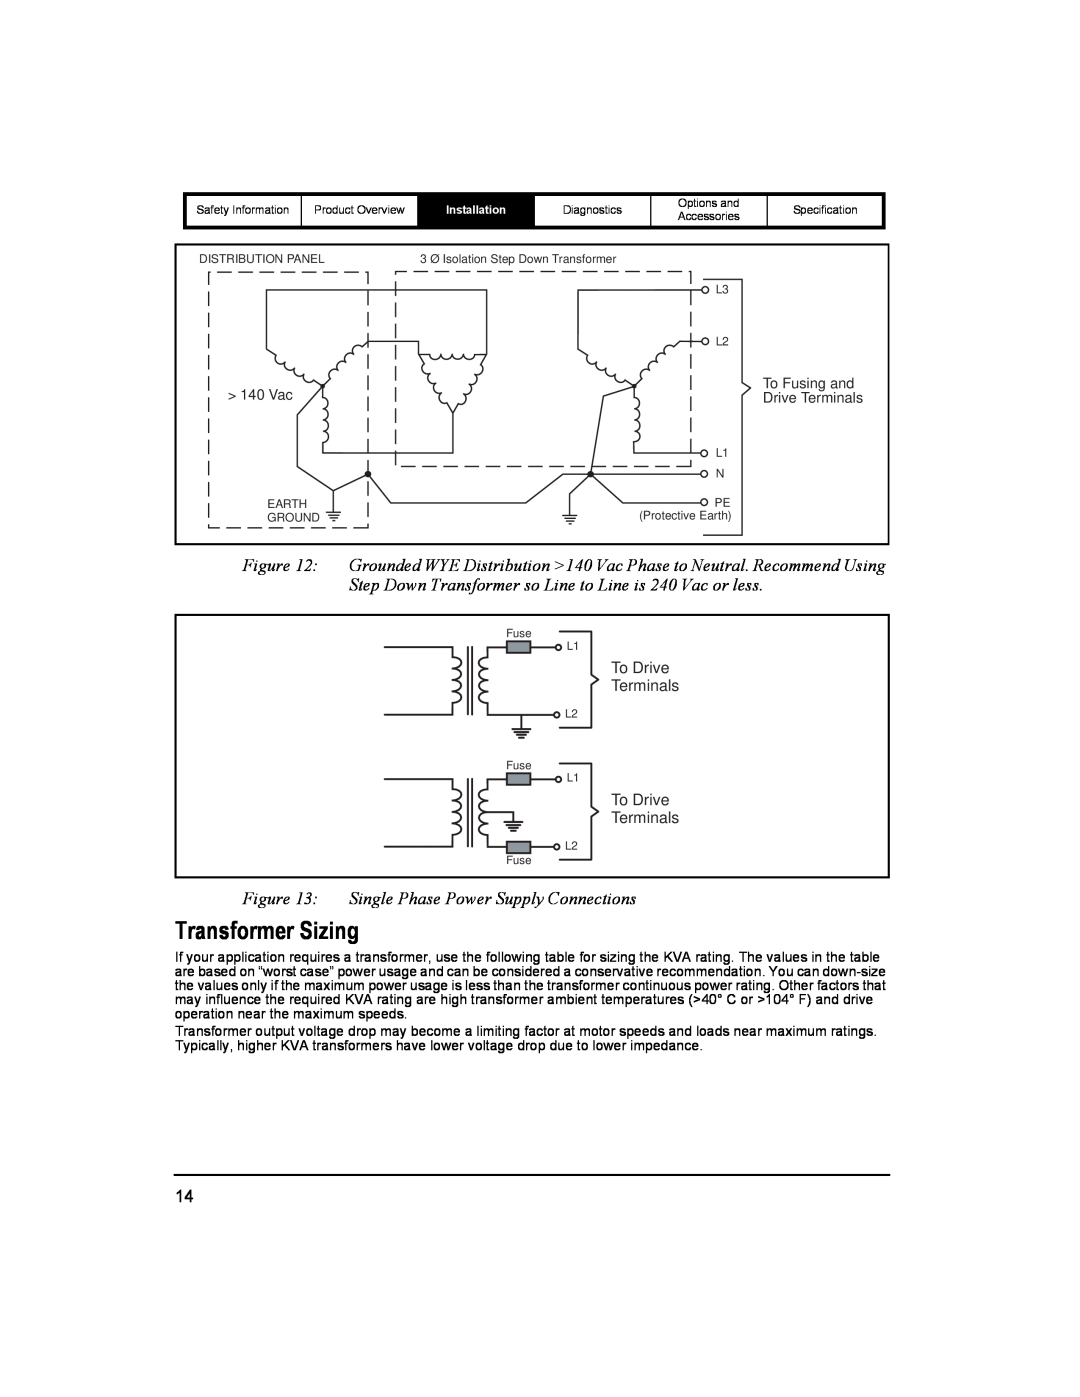 Emerson 400518-01 installation manual Transformer Sizing, Single Phase Power Supply Connections, To Drive Terminals 